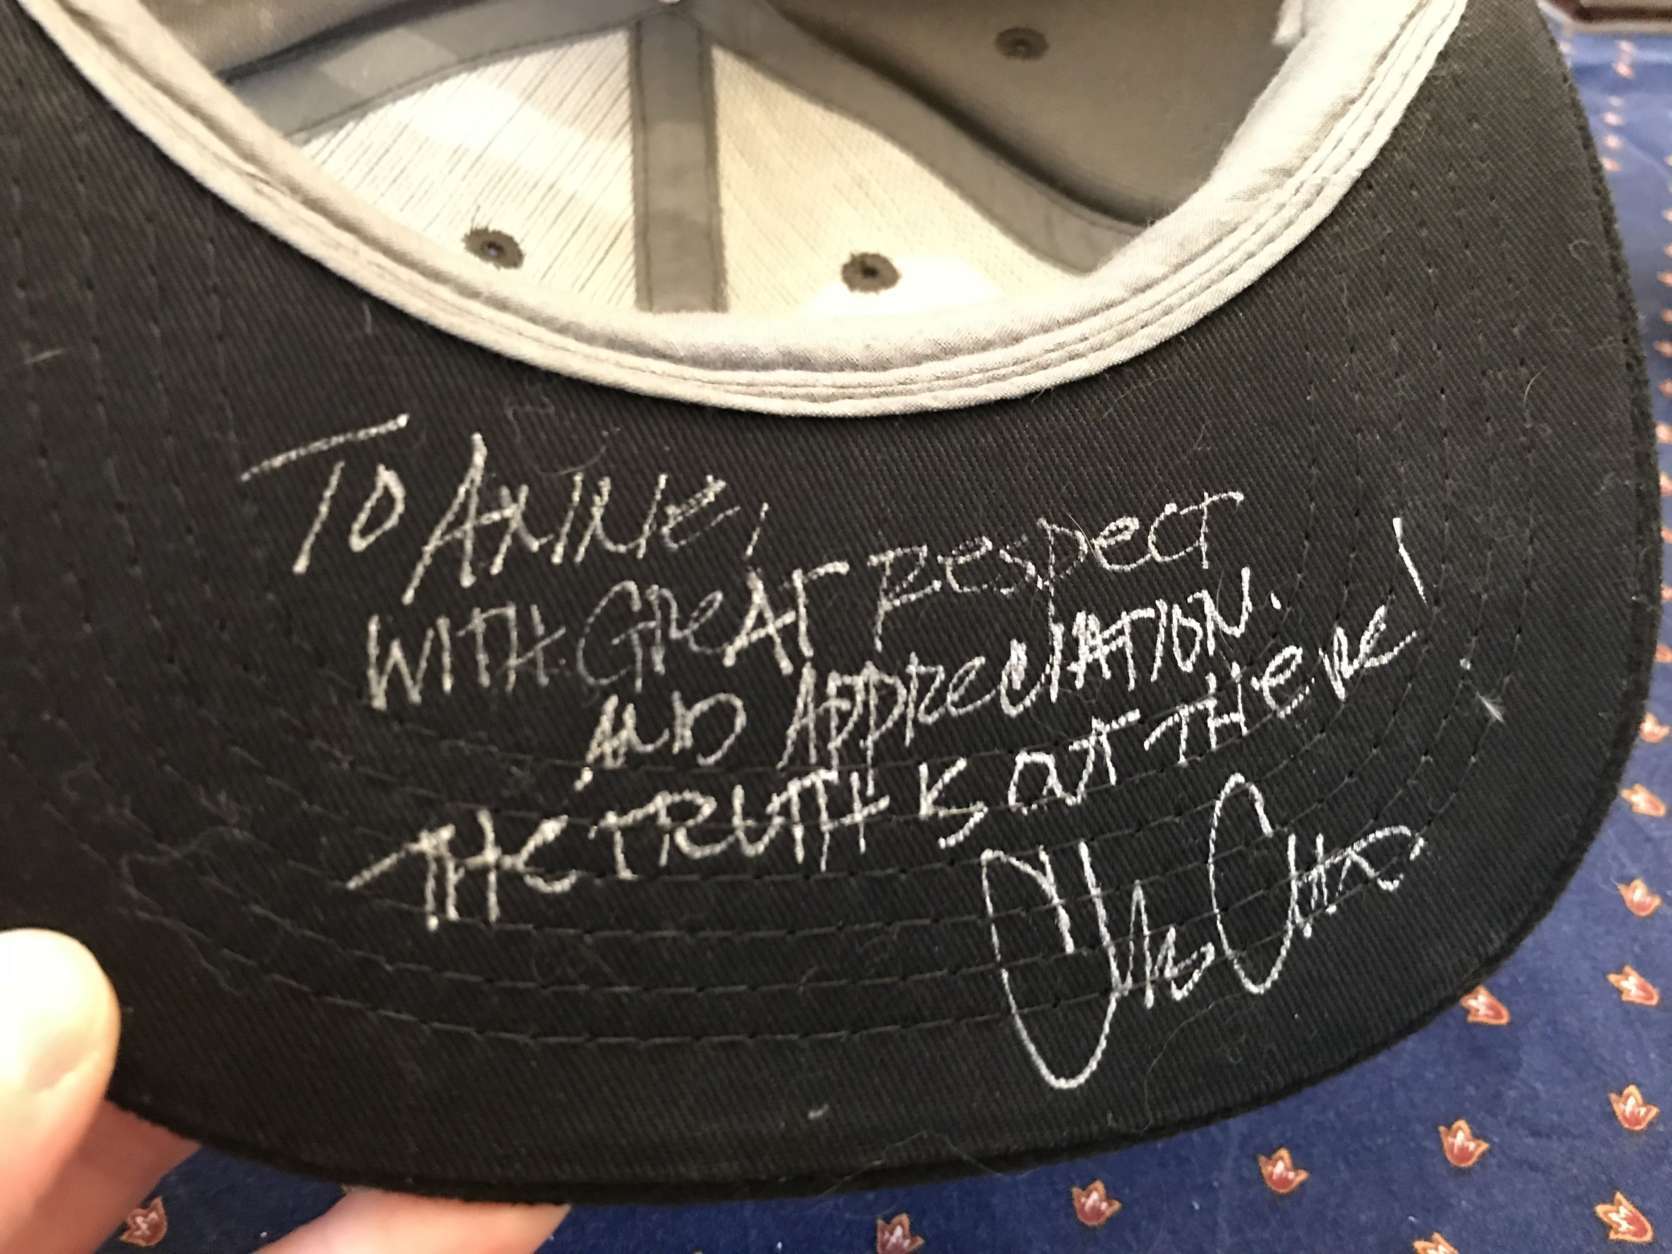 Chris Carter, the creator of “The X-Files,” also signed a hat for Anne Simon. 
(WTOP/Michelle Basch)